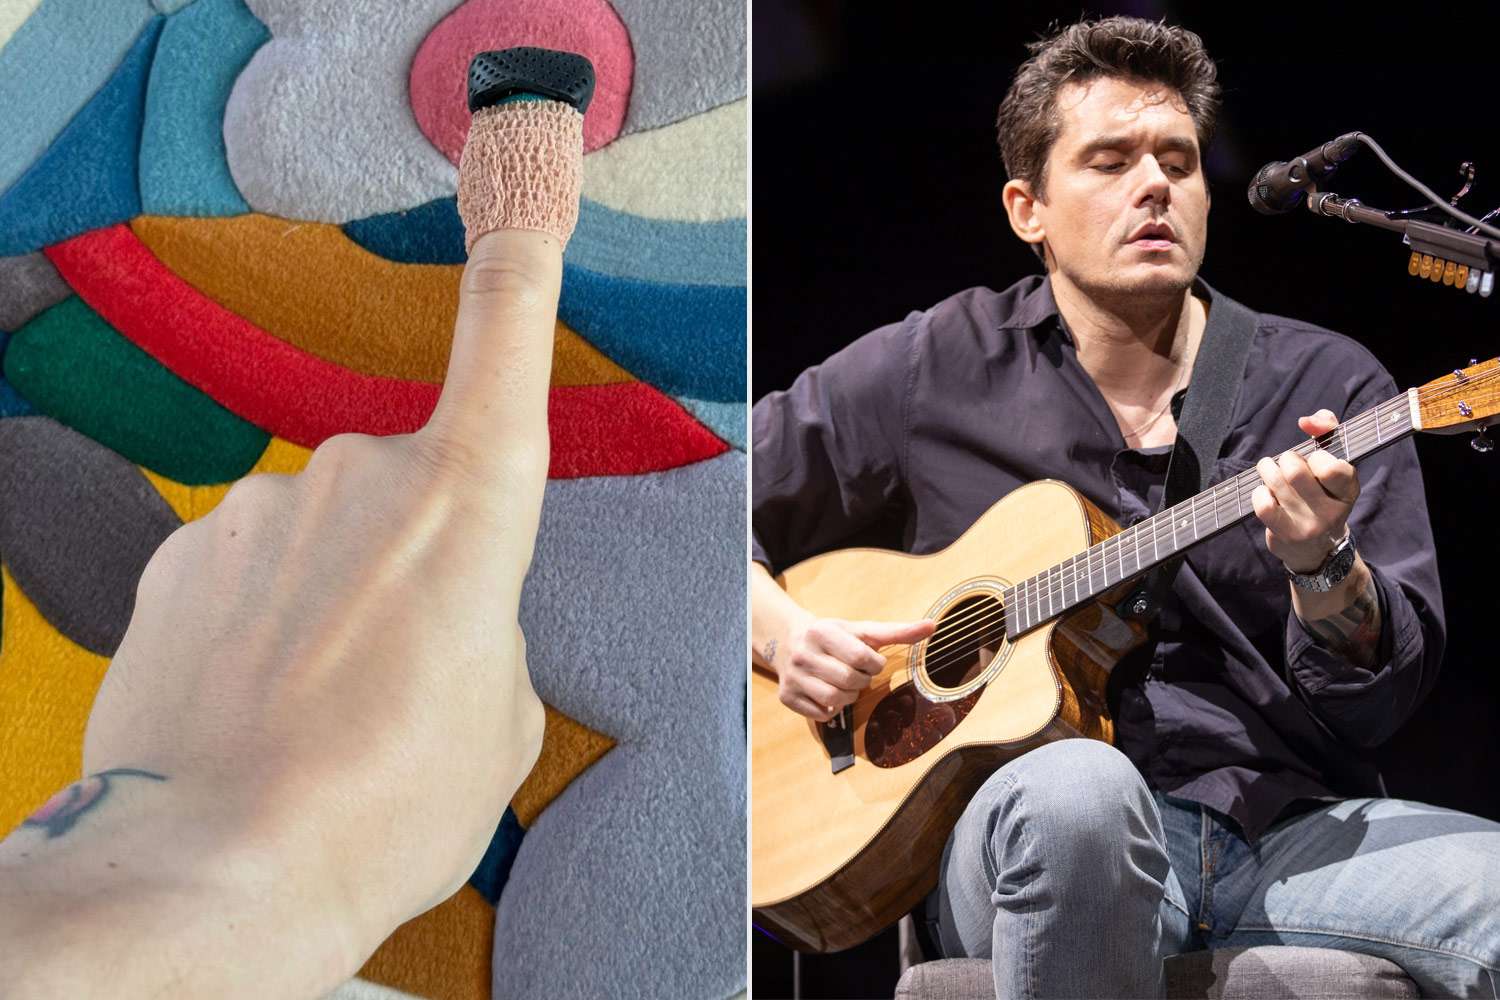 John Mayer Says His Finger Is 'Out of Commission' After Injury: 'Practicing Guitar Using the Other Three'